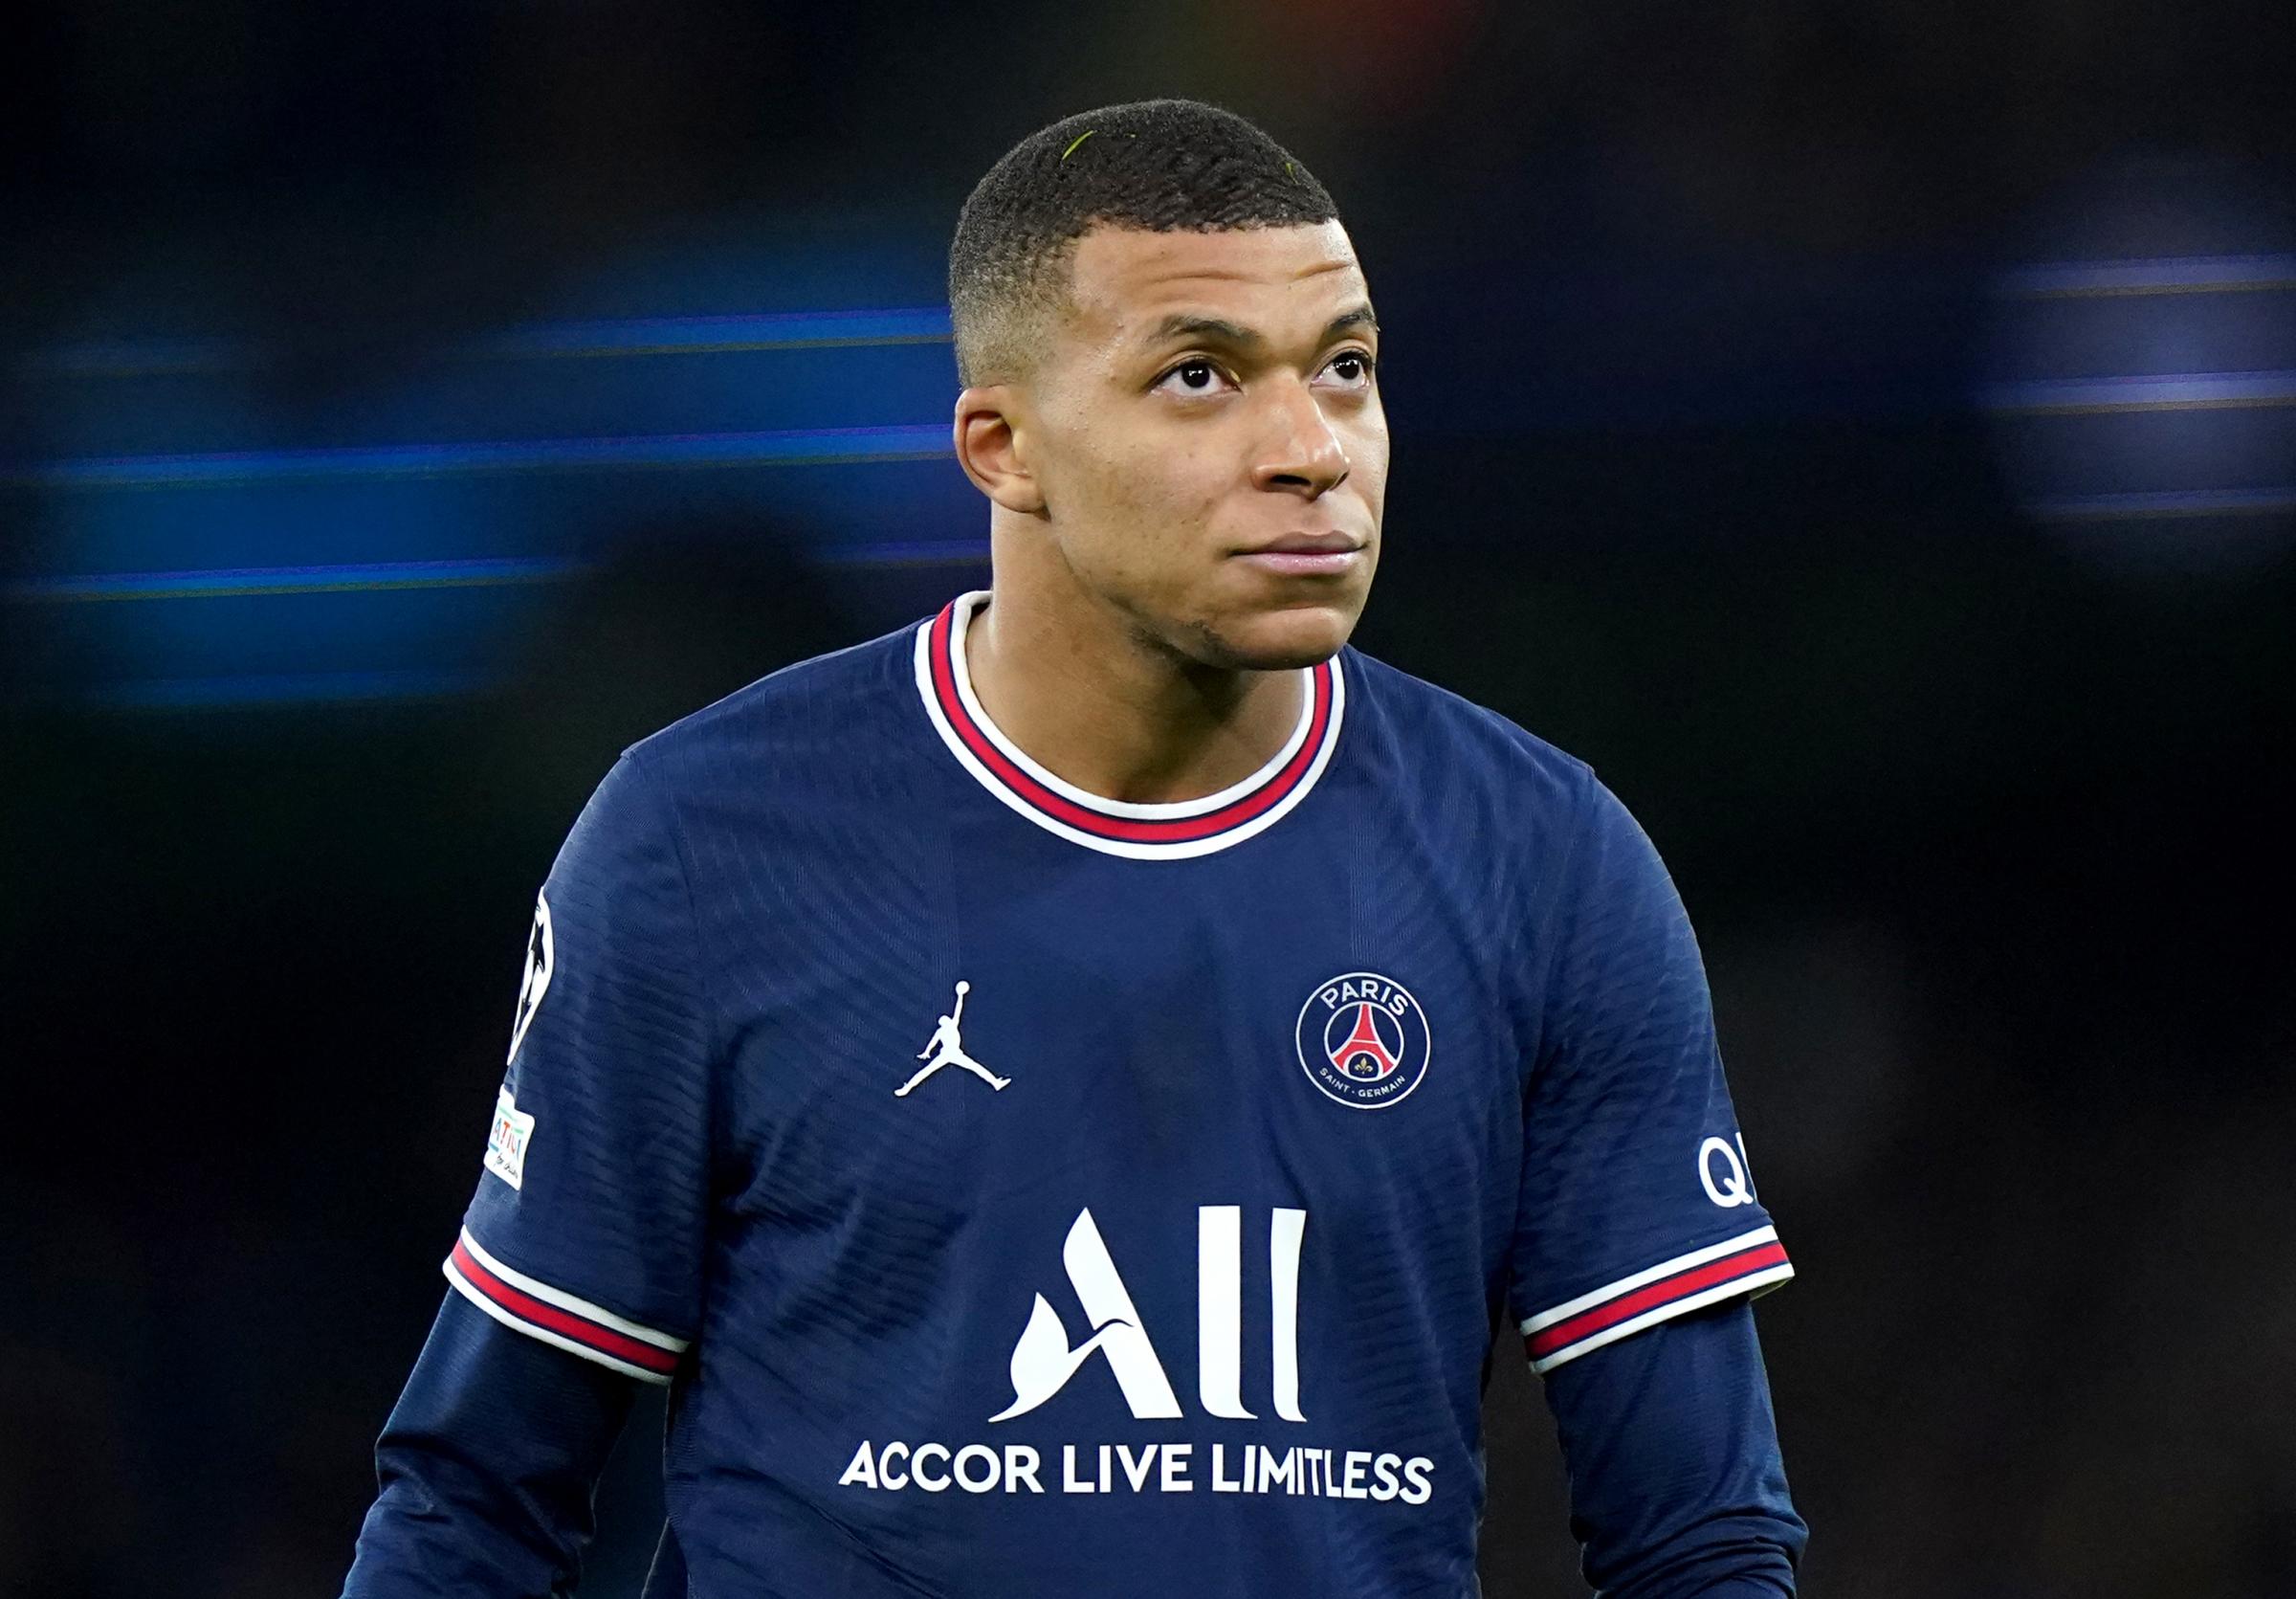 Hearts World Cup stars issued Mbappe and Benzema plea